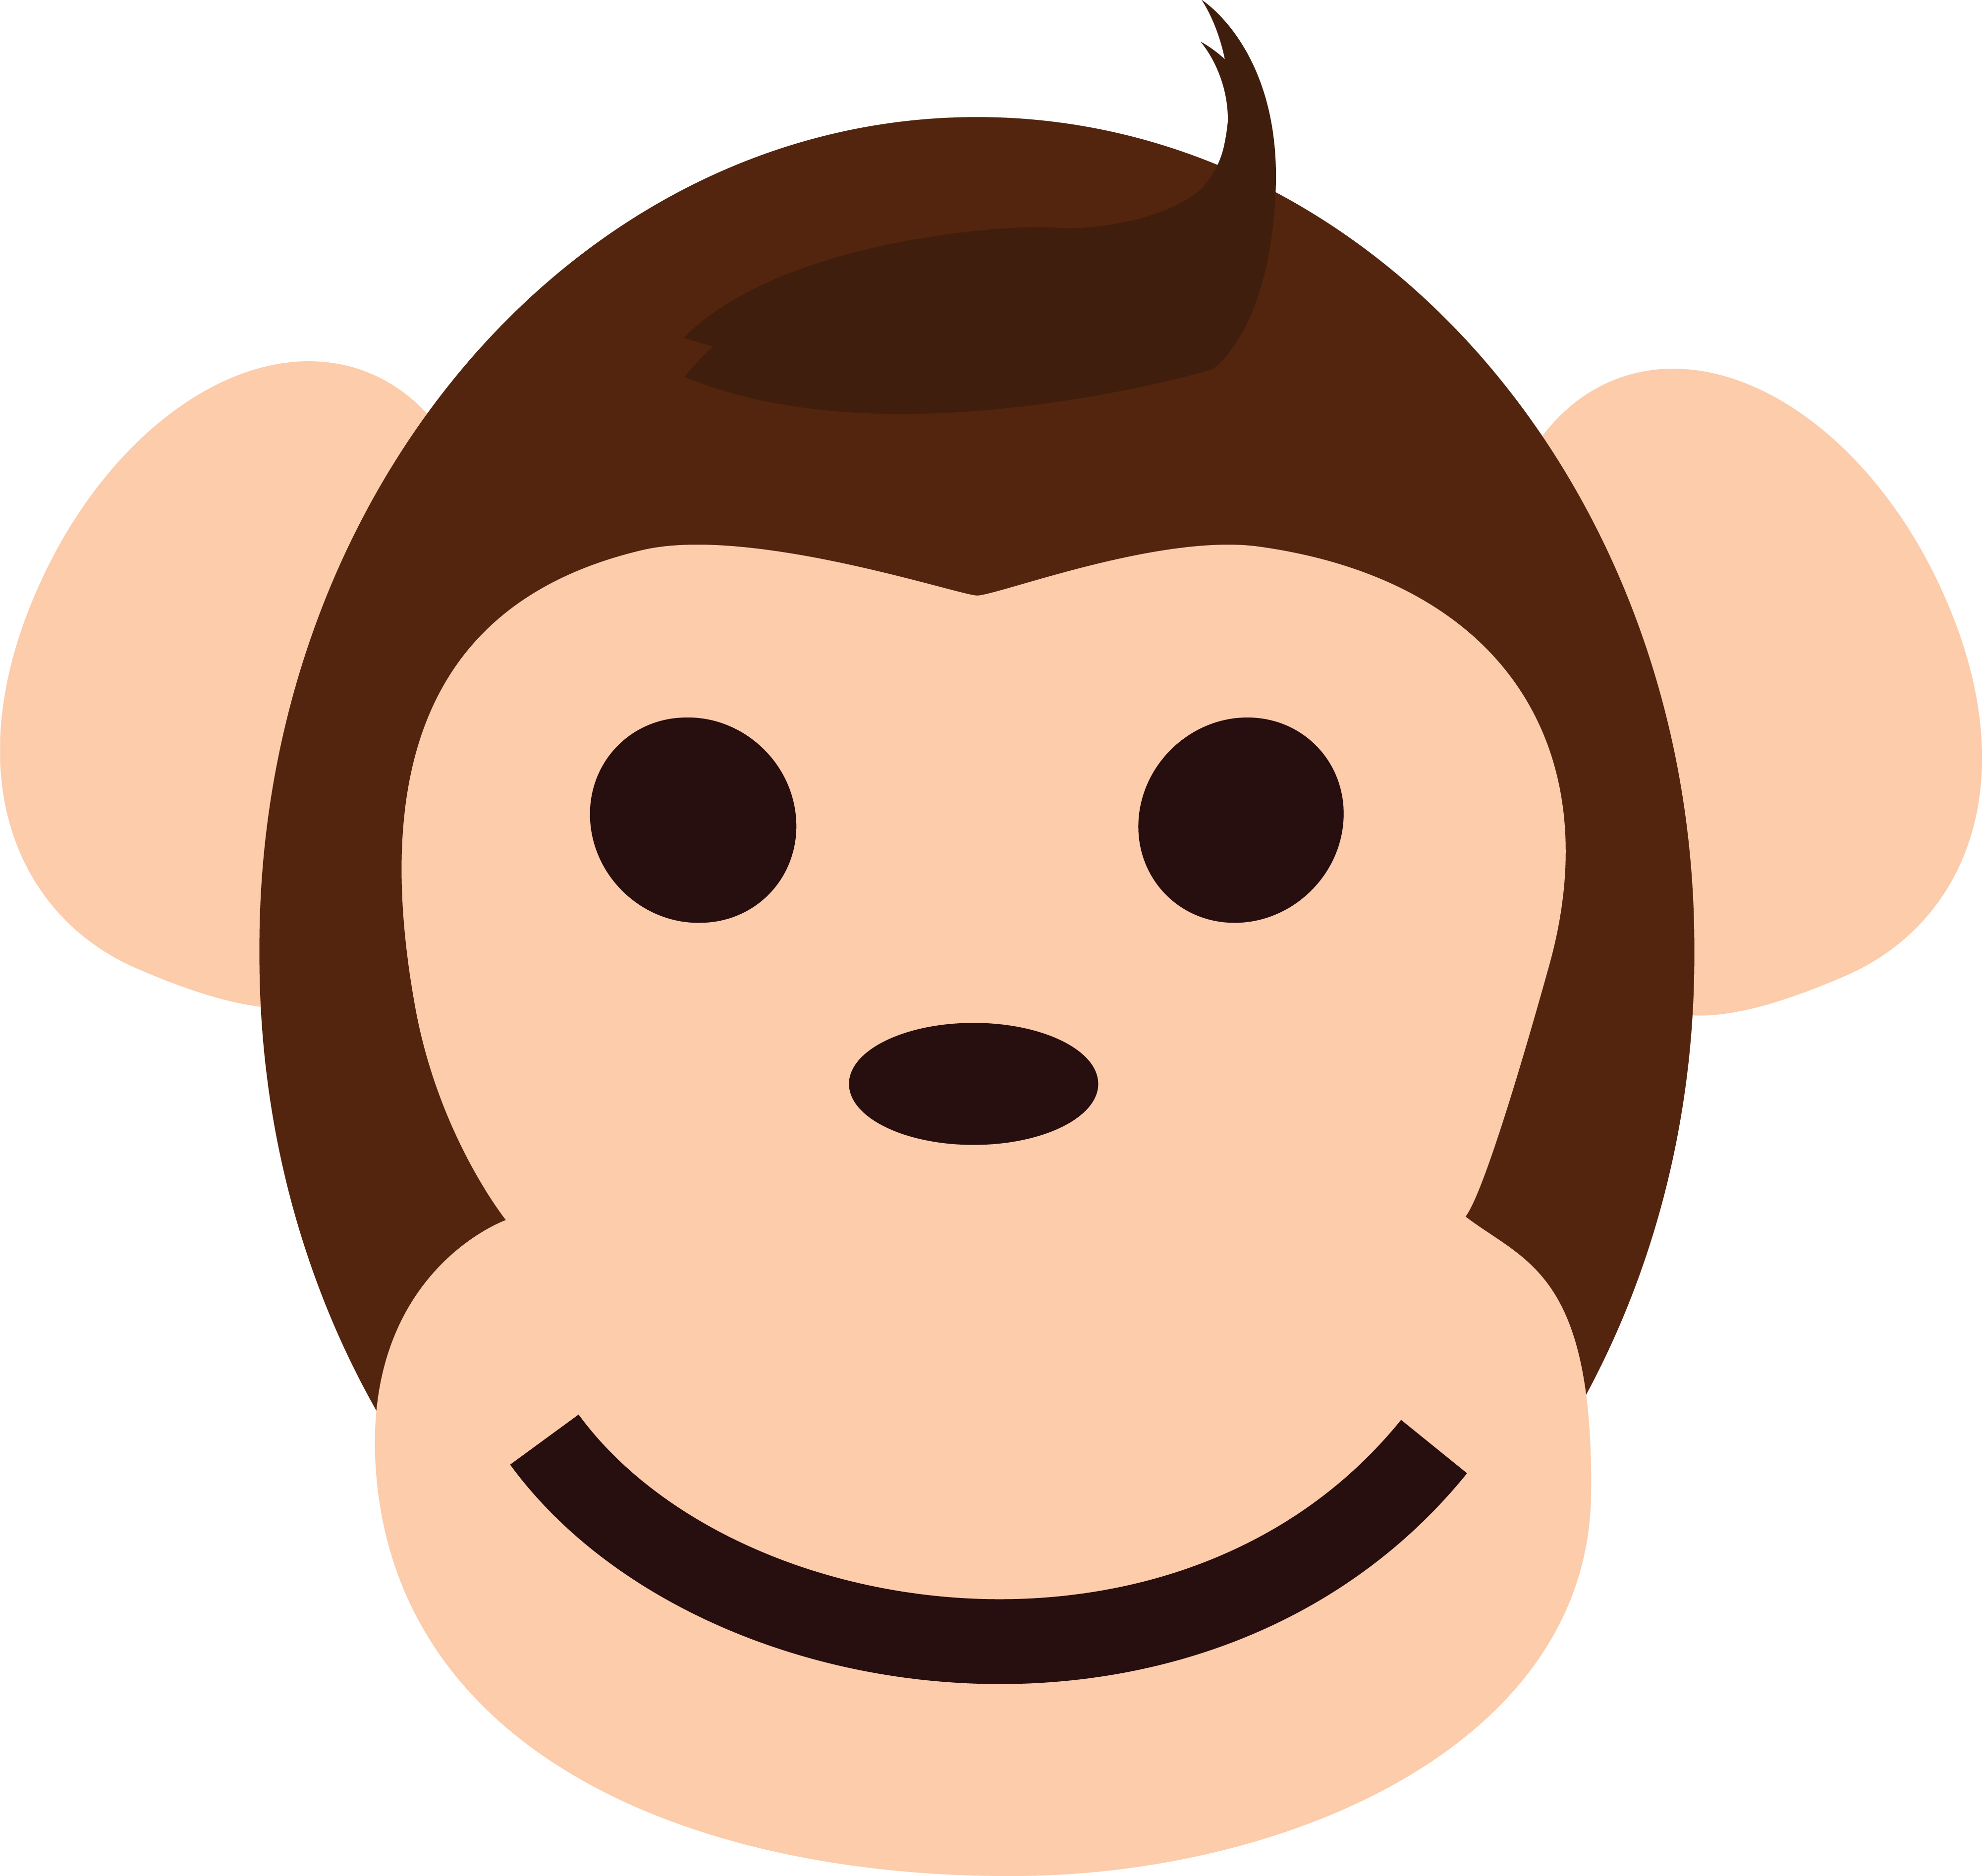 clipart of monkey face - photo #18